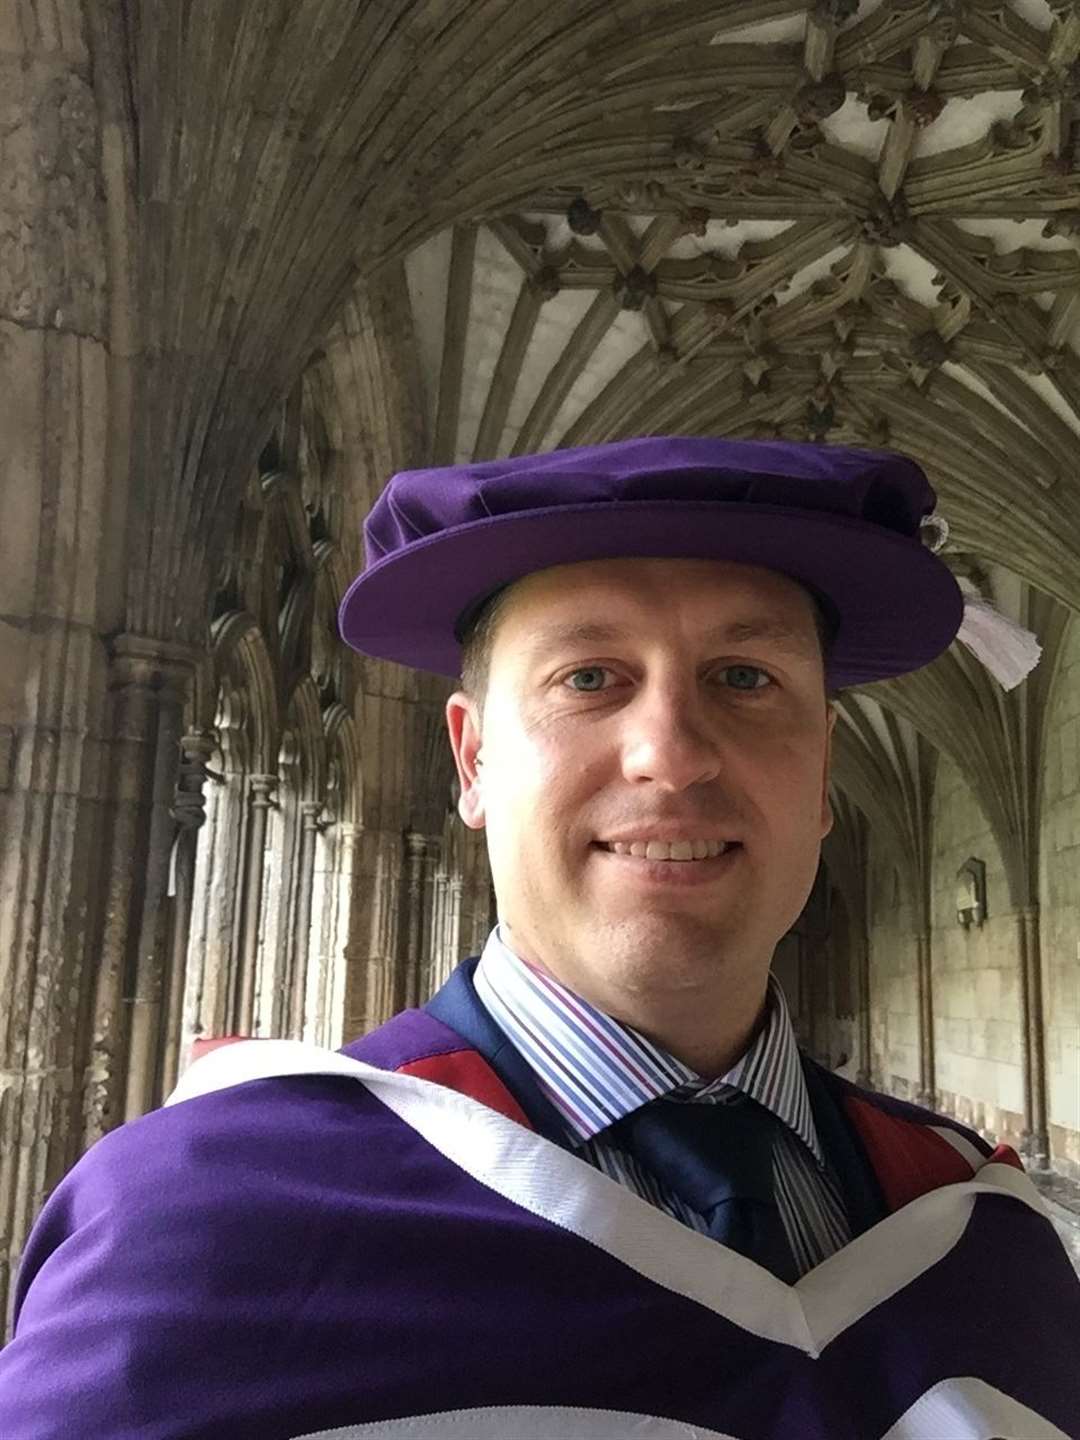 Dr Nick Woznitza, has been awarded an MBE for his clinical and academic leadership skills in diagnostic radiography